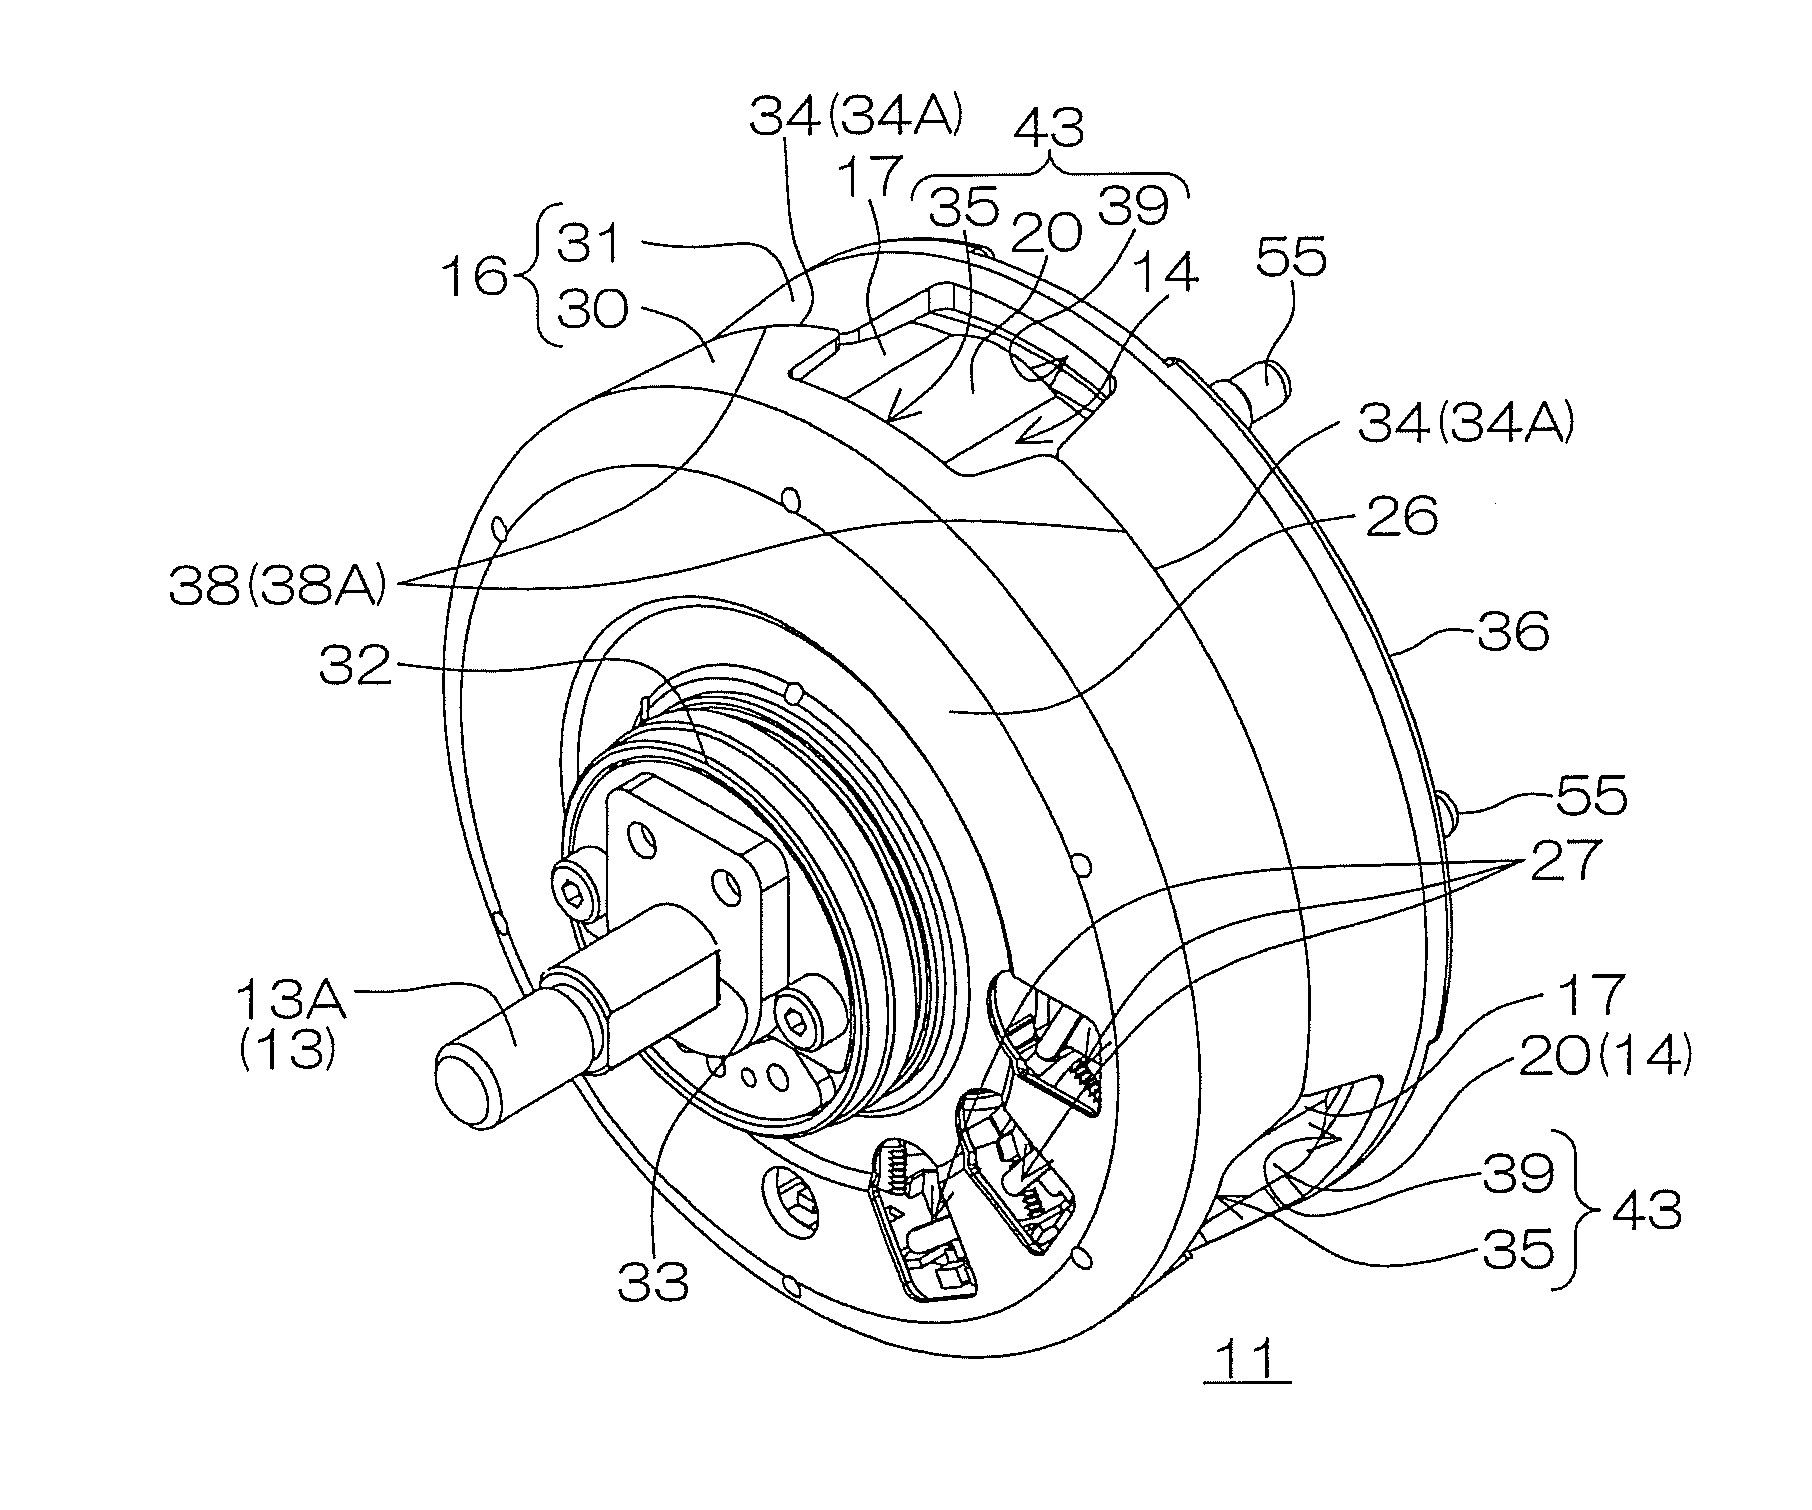 Direct-current motor and hub unit